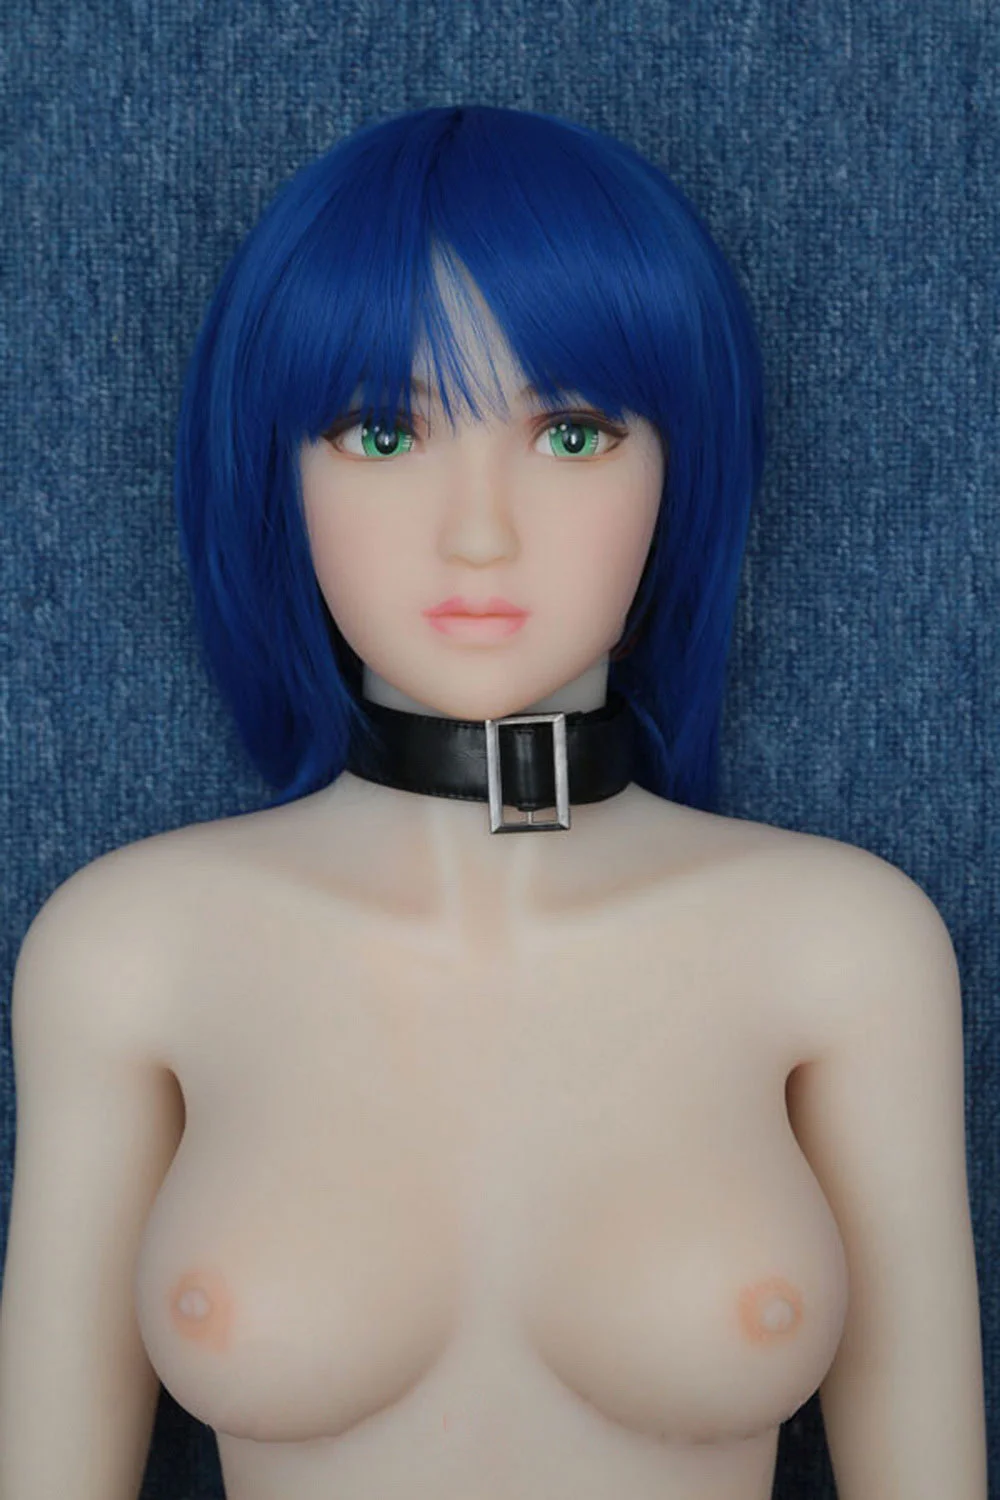 Anime sex doll wearing a collar